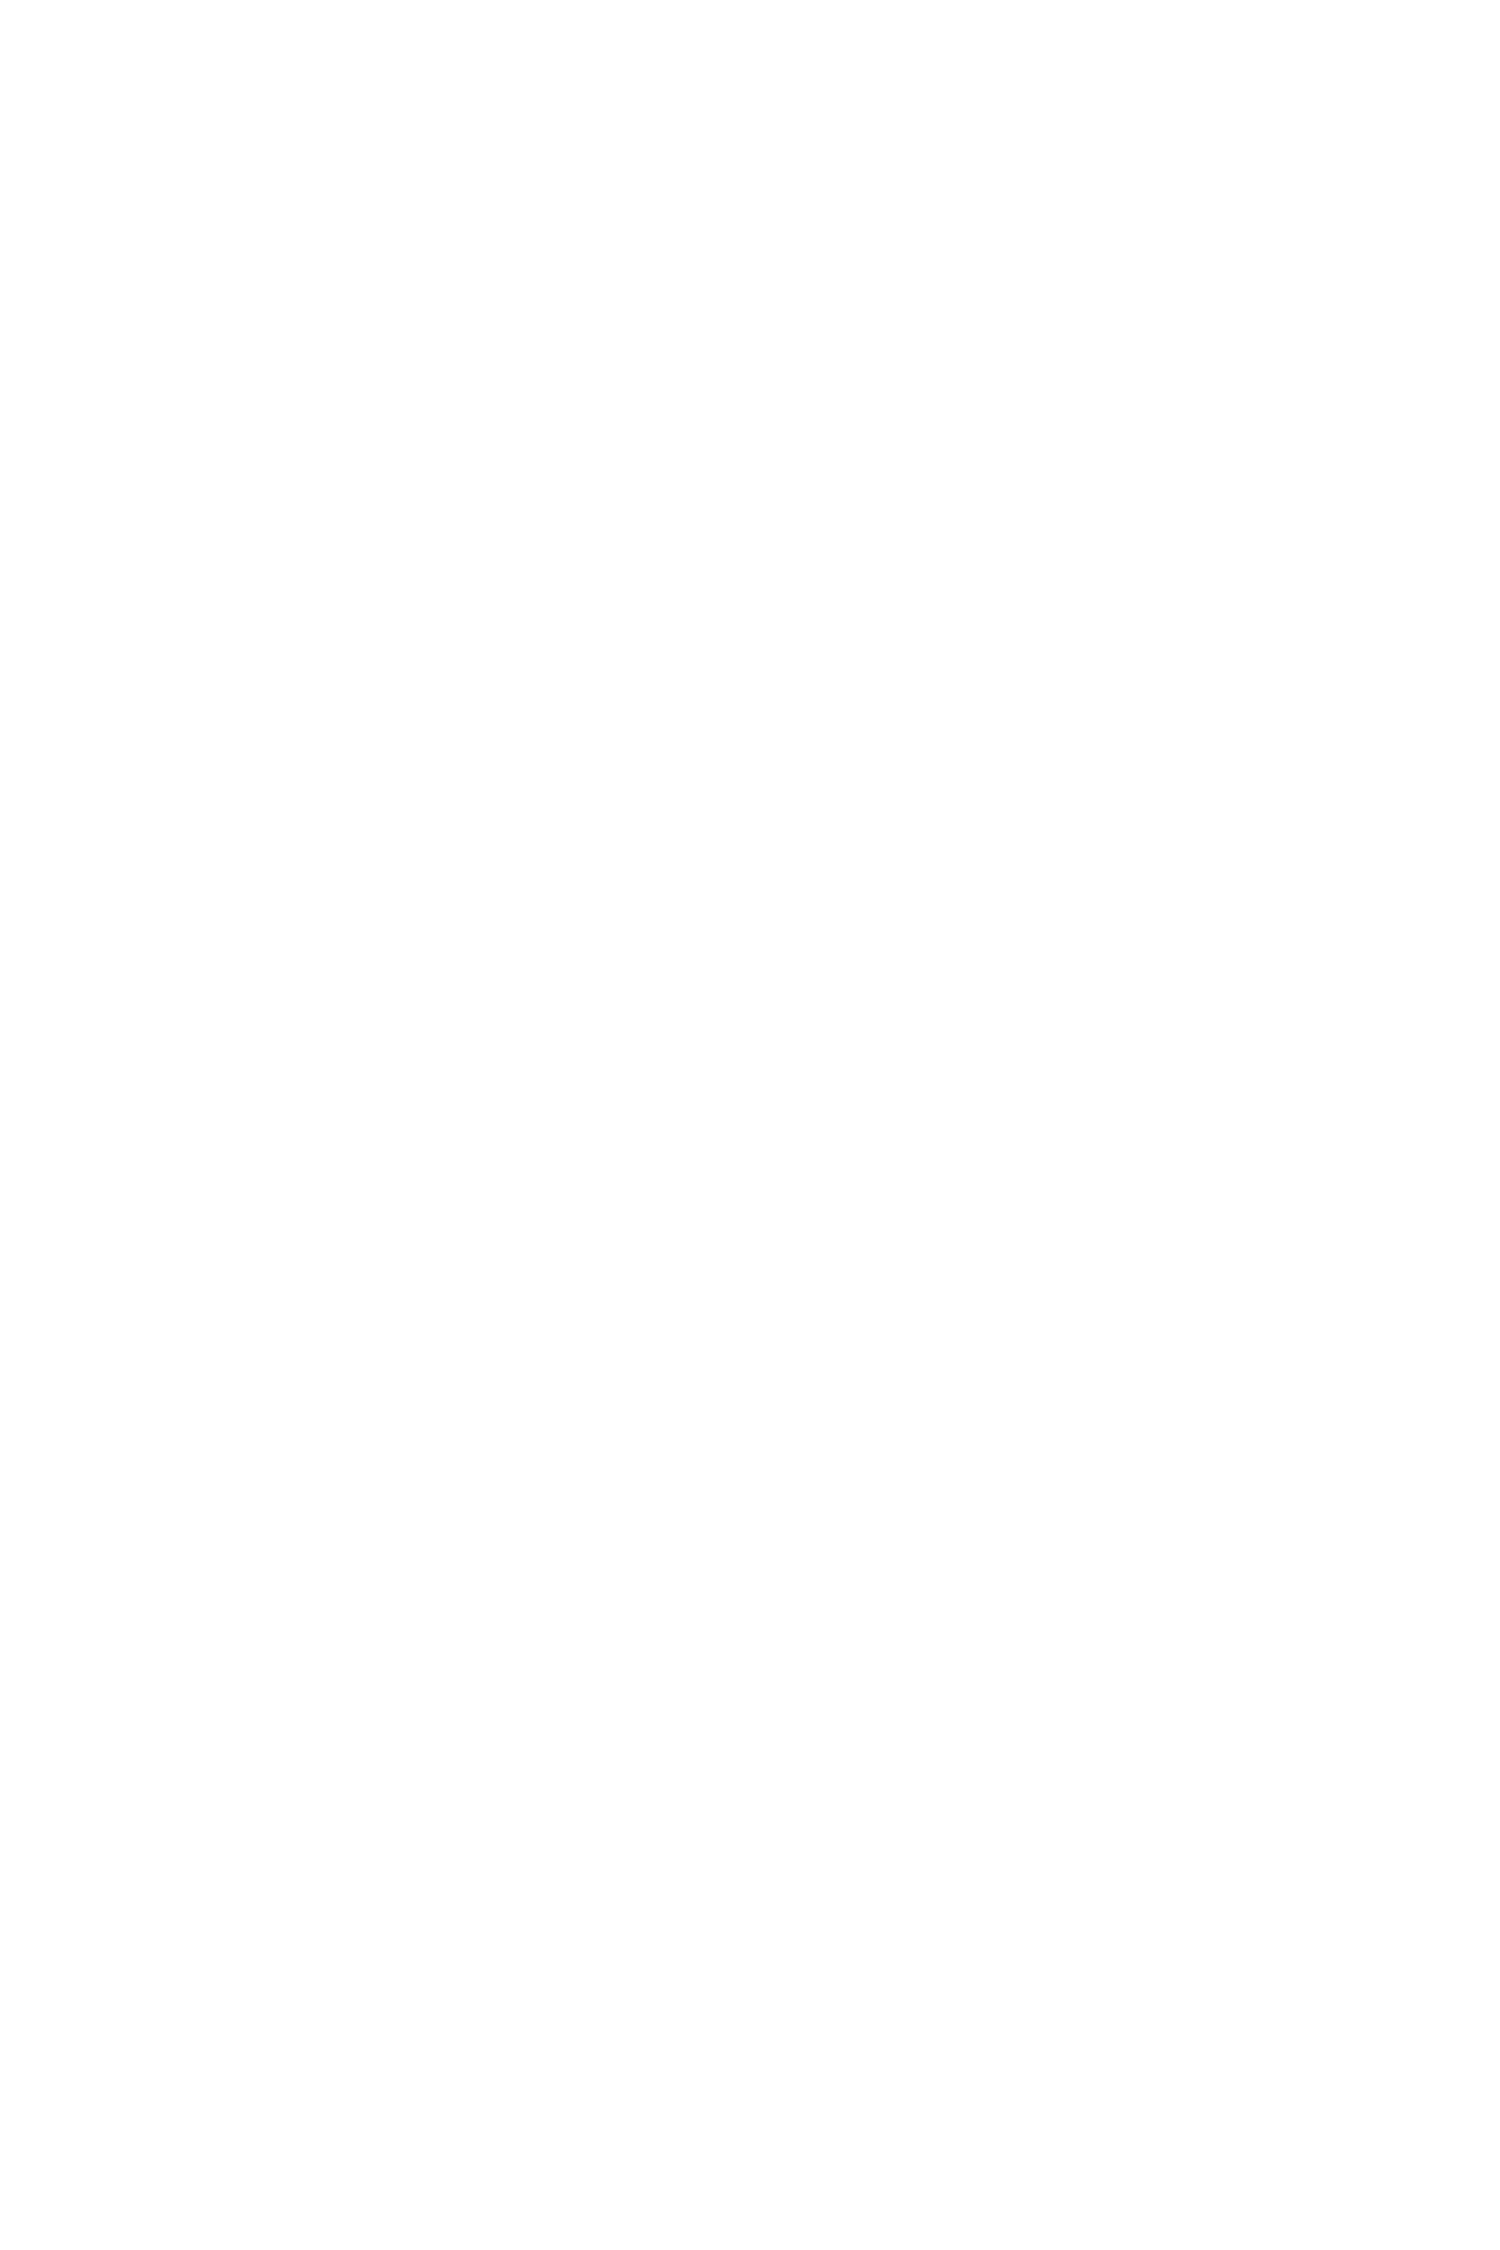 2nd Mile Ministries